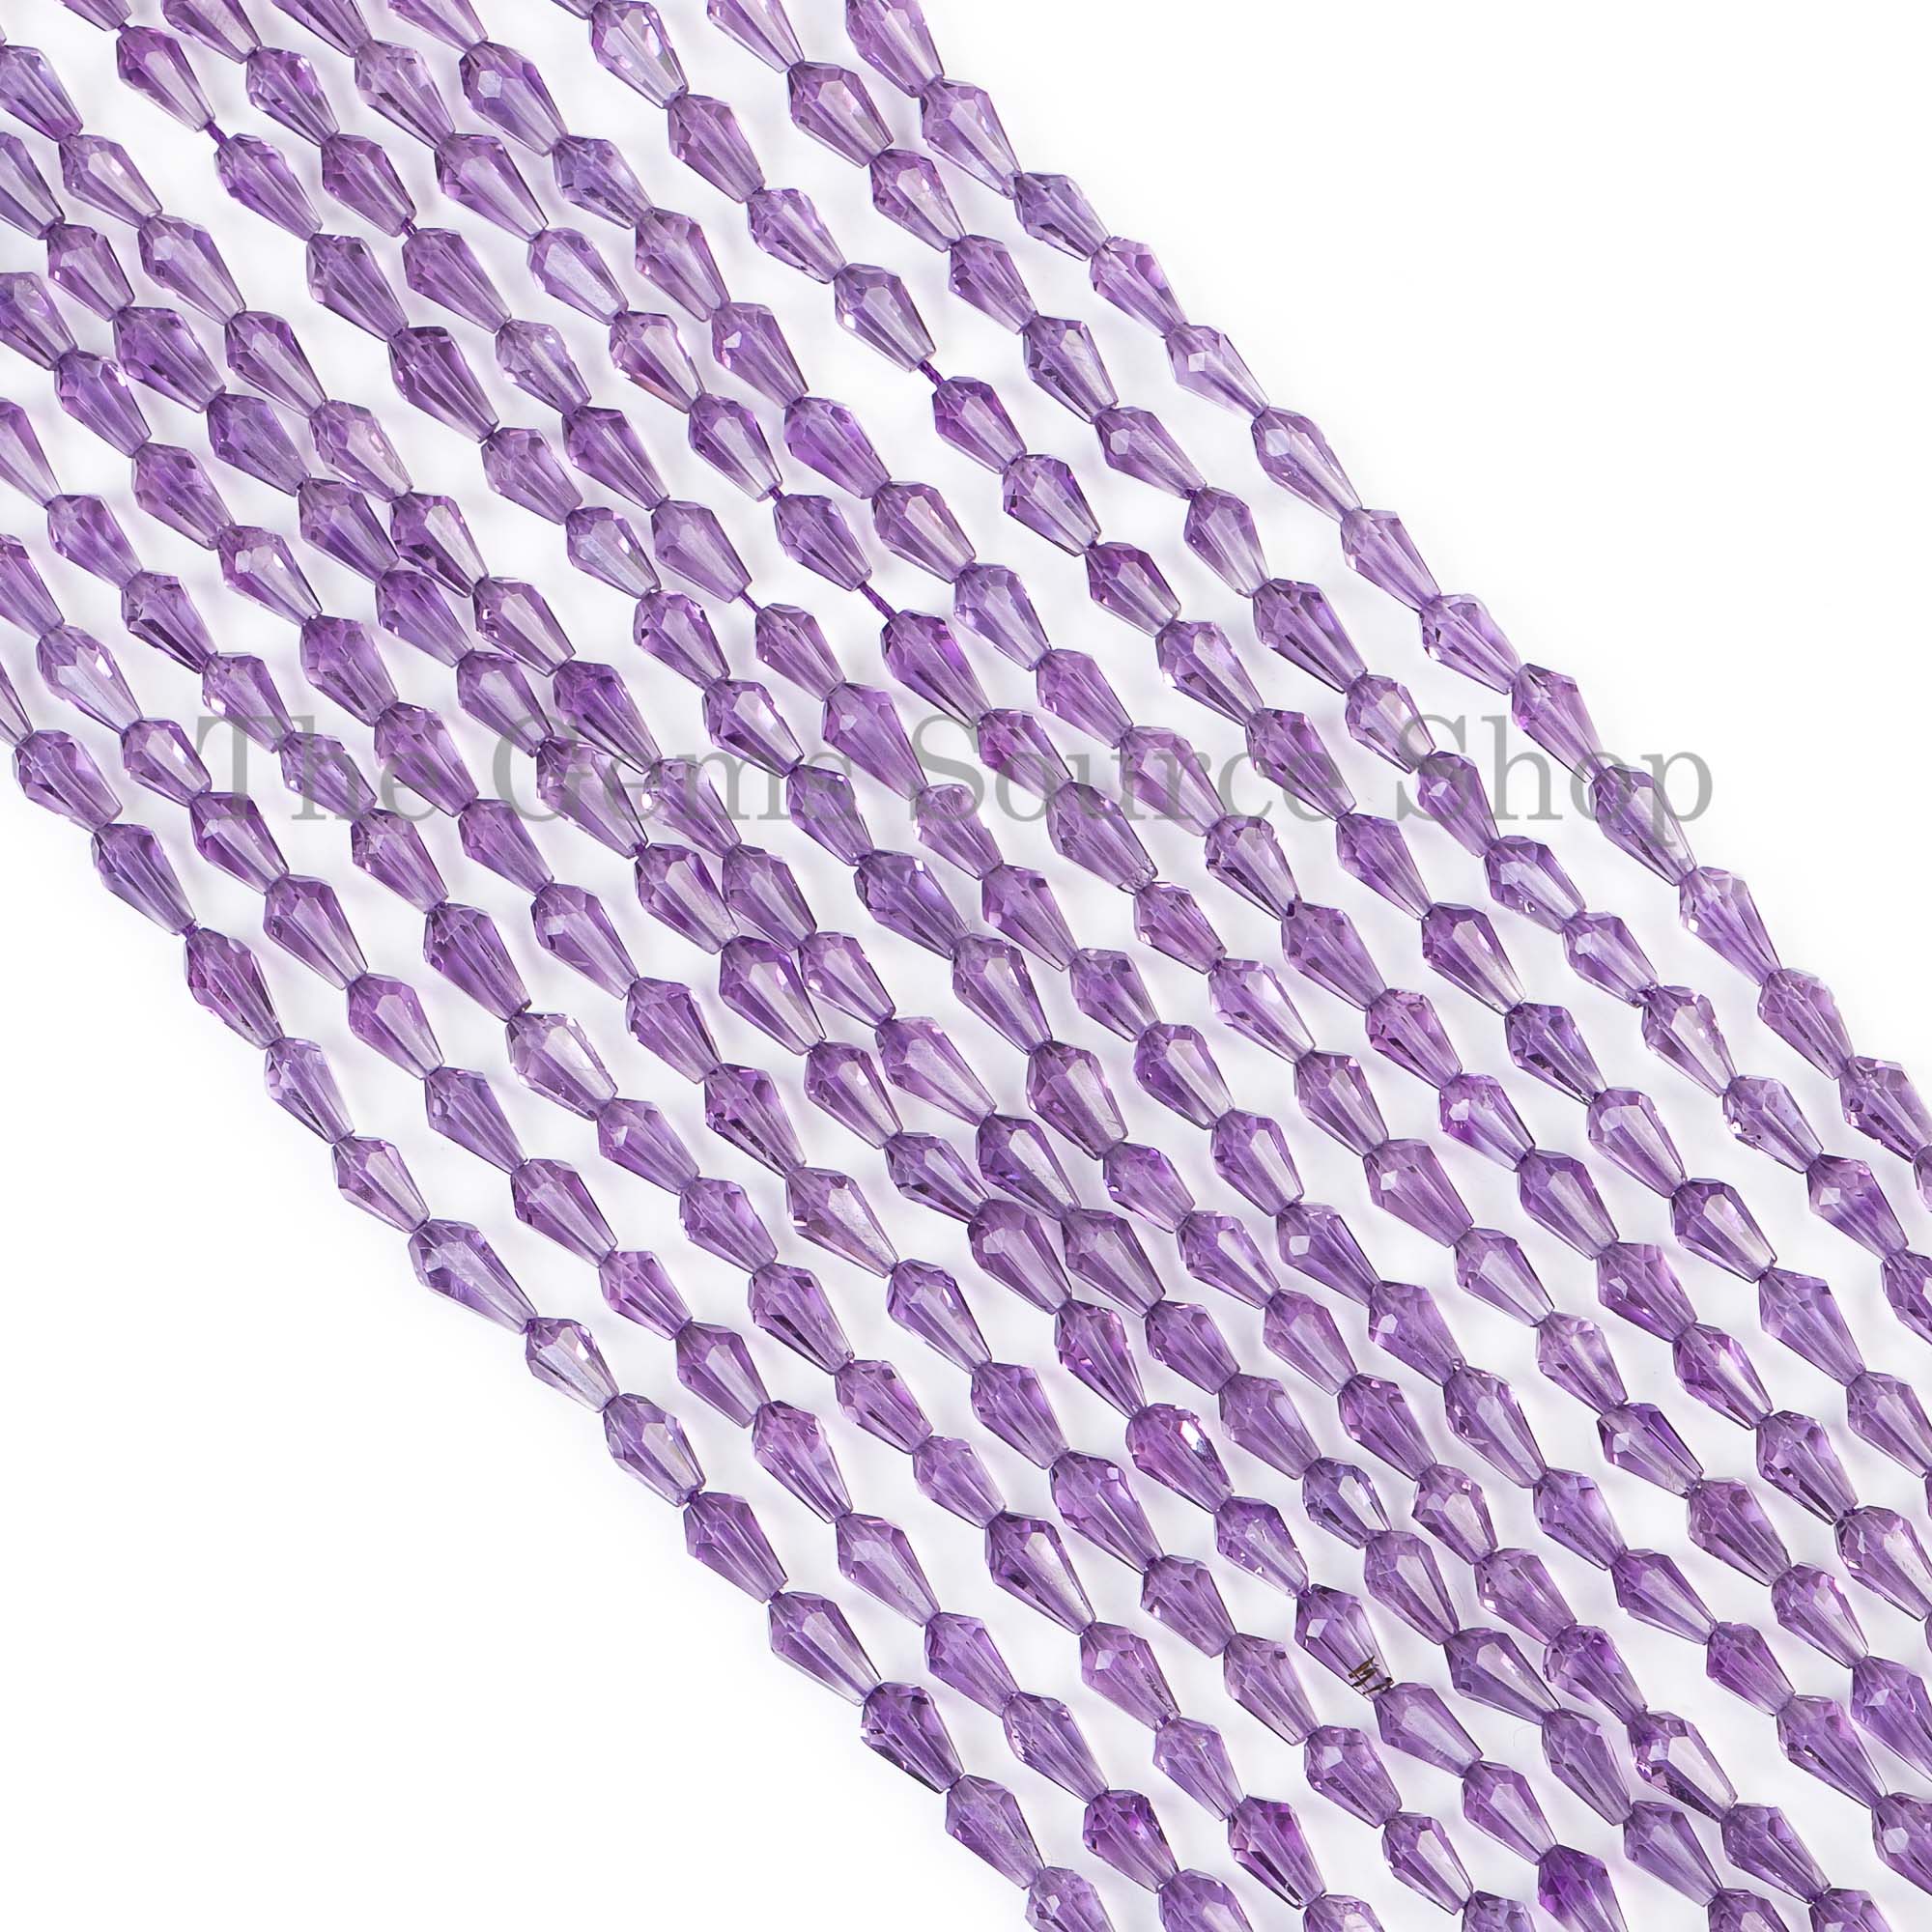 Amethyst Faceted Straight Drill Drop Beads, Amethyst Tear Drop Beads, Amethyst Faceted Beads